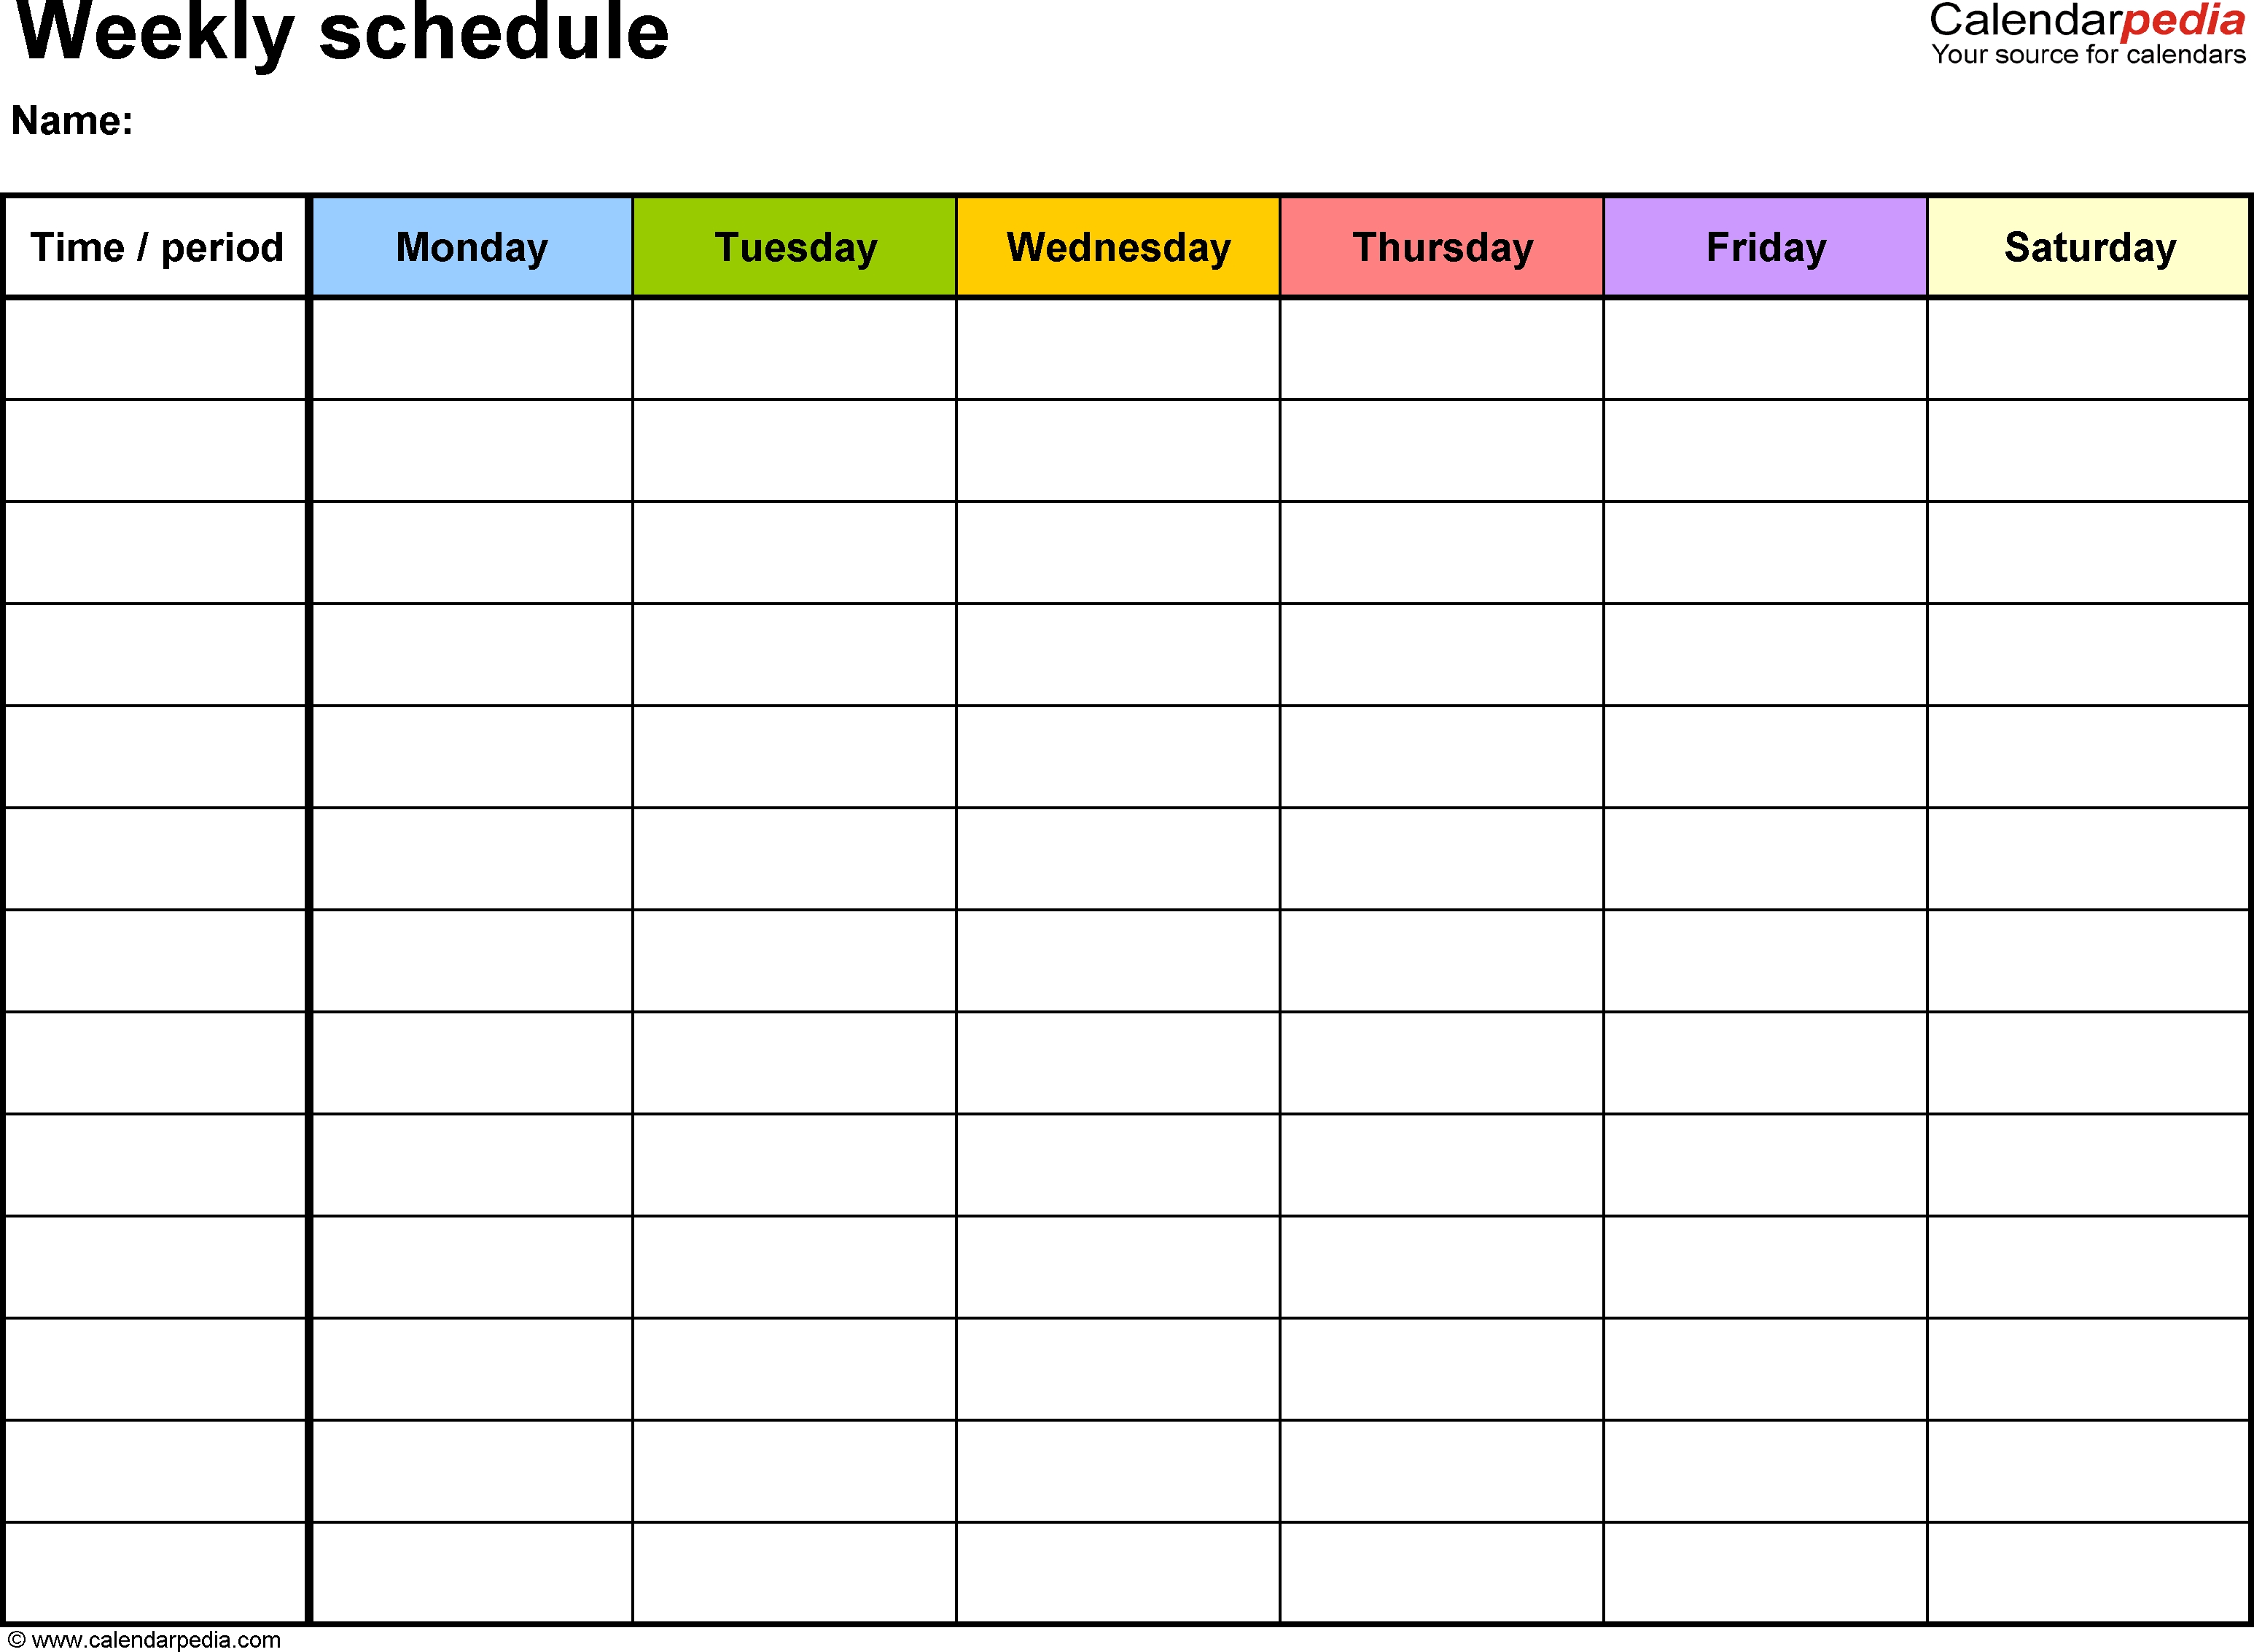 Free Weekly Schedule Templates For Word - 18 Templates-Monday Through Friday Calendar Template